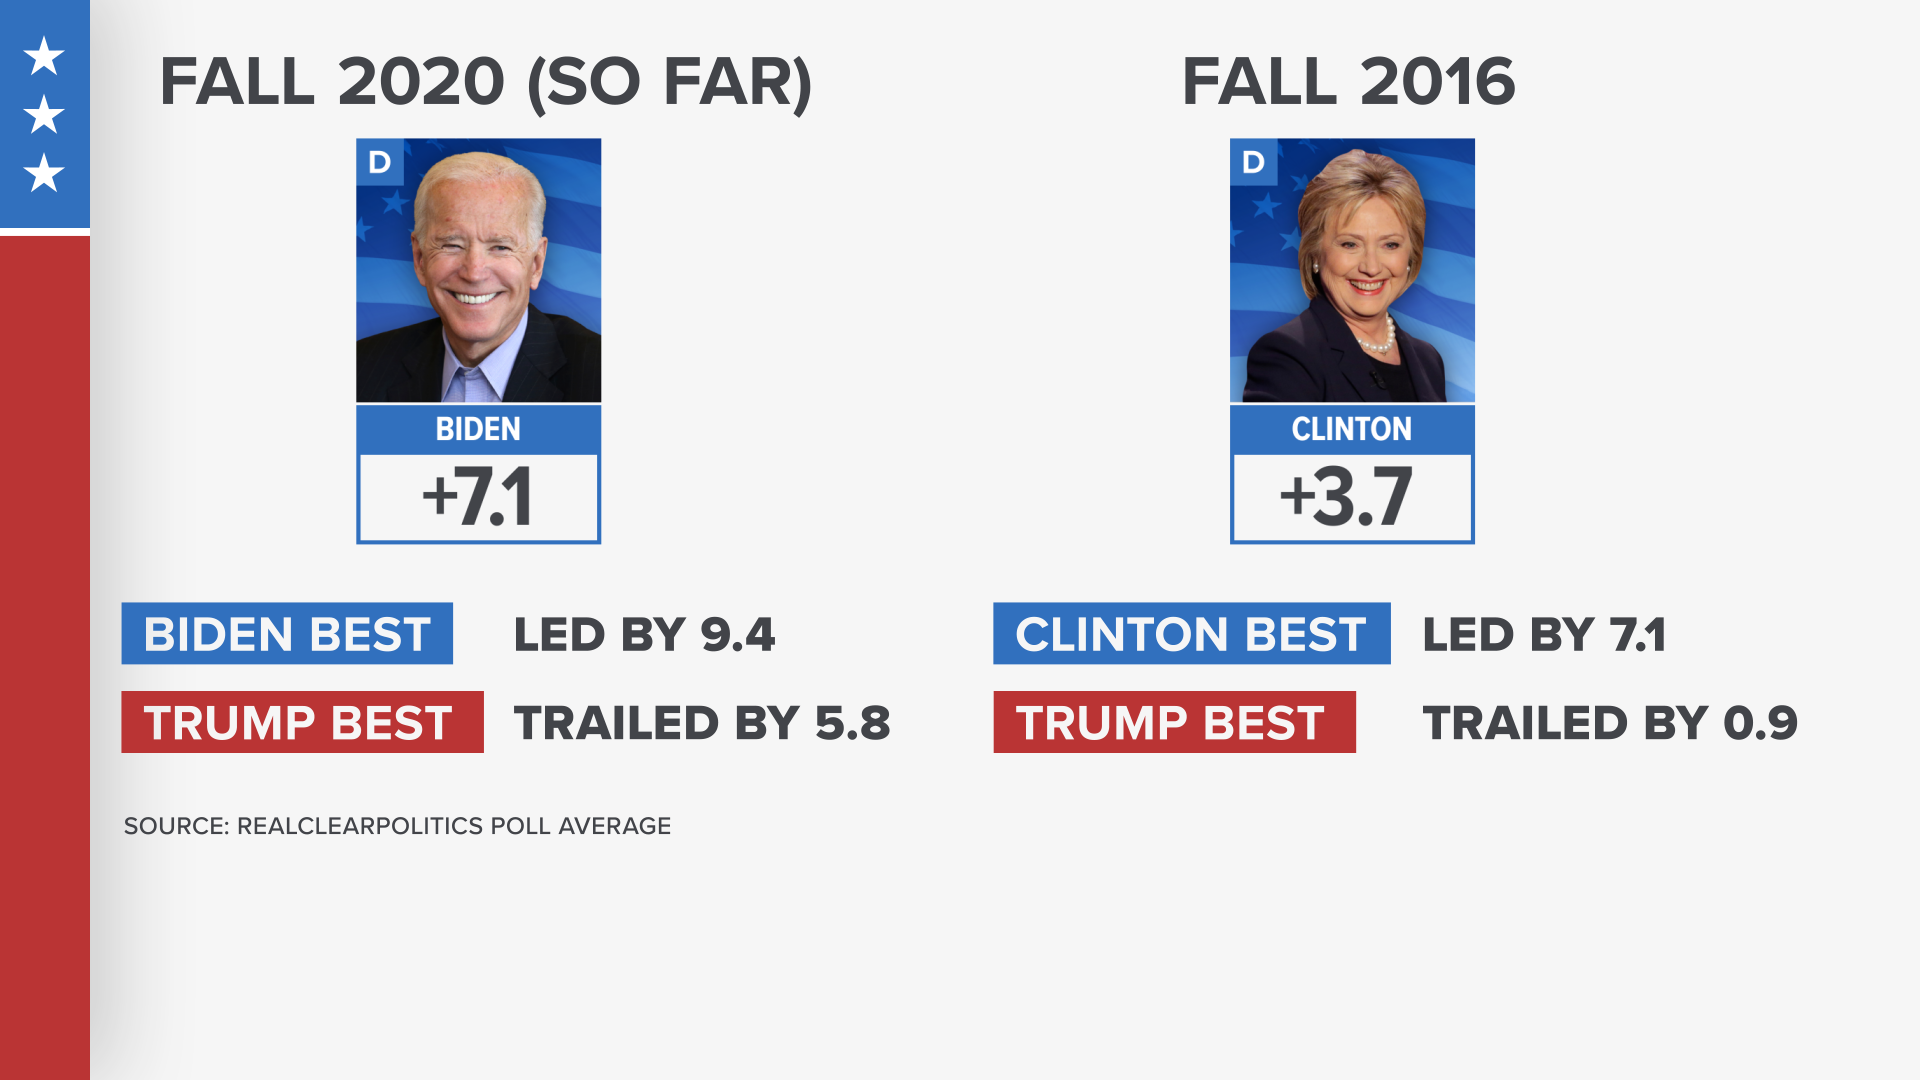 Polls in 2016 predicted a Hillary Clinton victory. Here's what's different with polling in the 2020 election between President Donald Trump and Joe Biden.